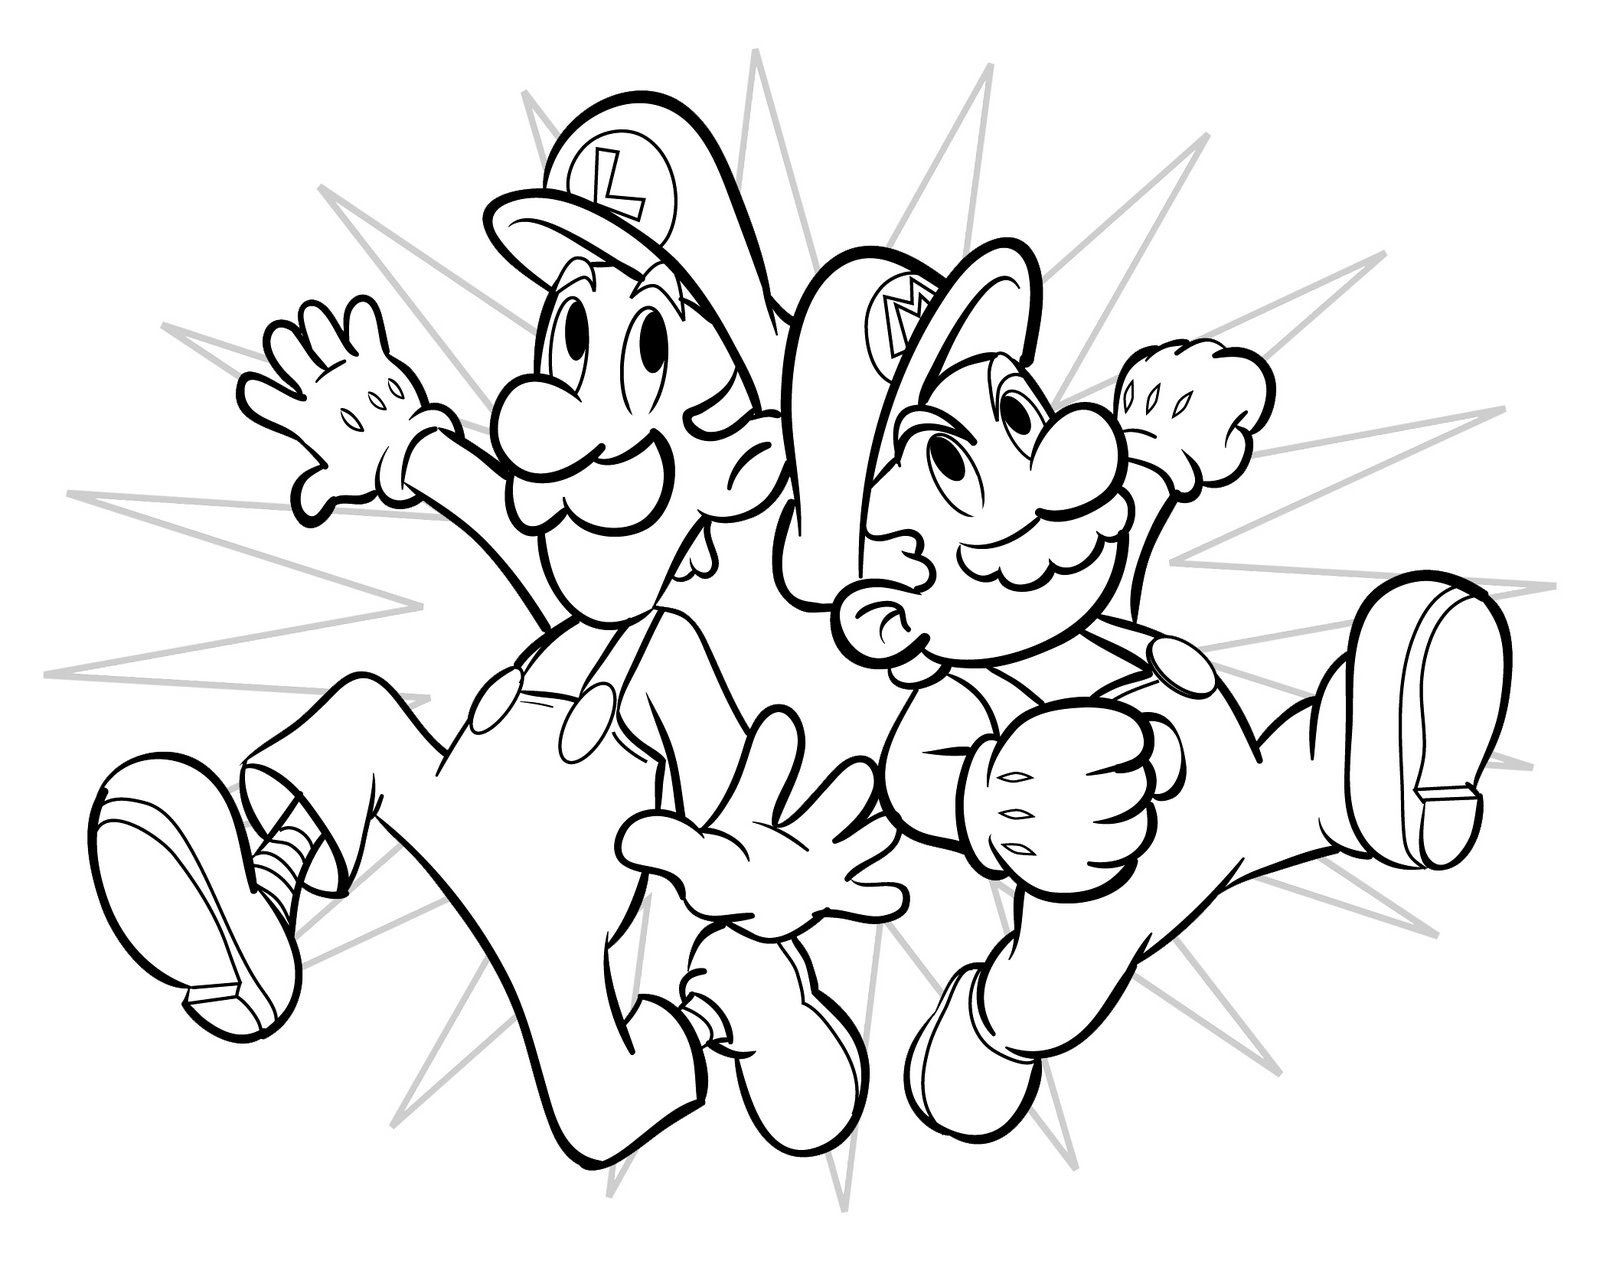 Free printable luigi coloring pages for kids